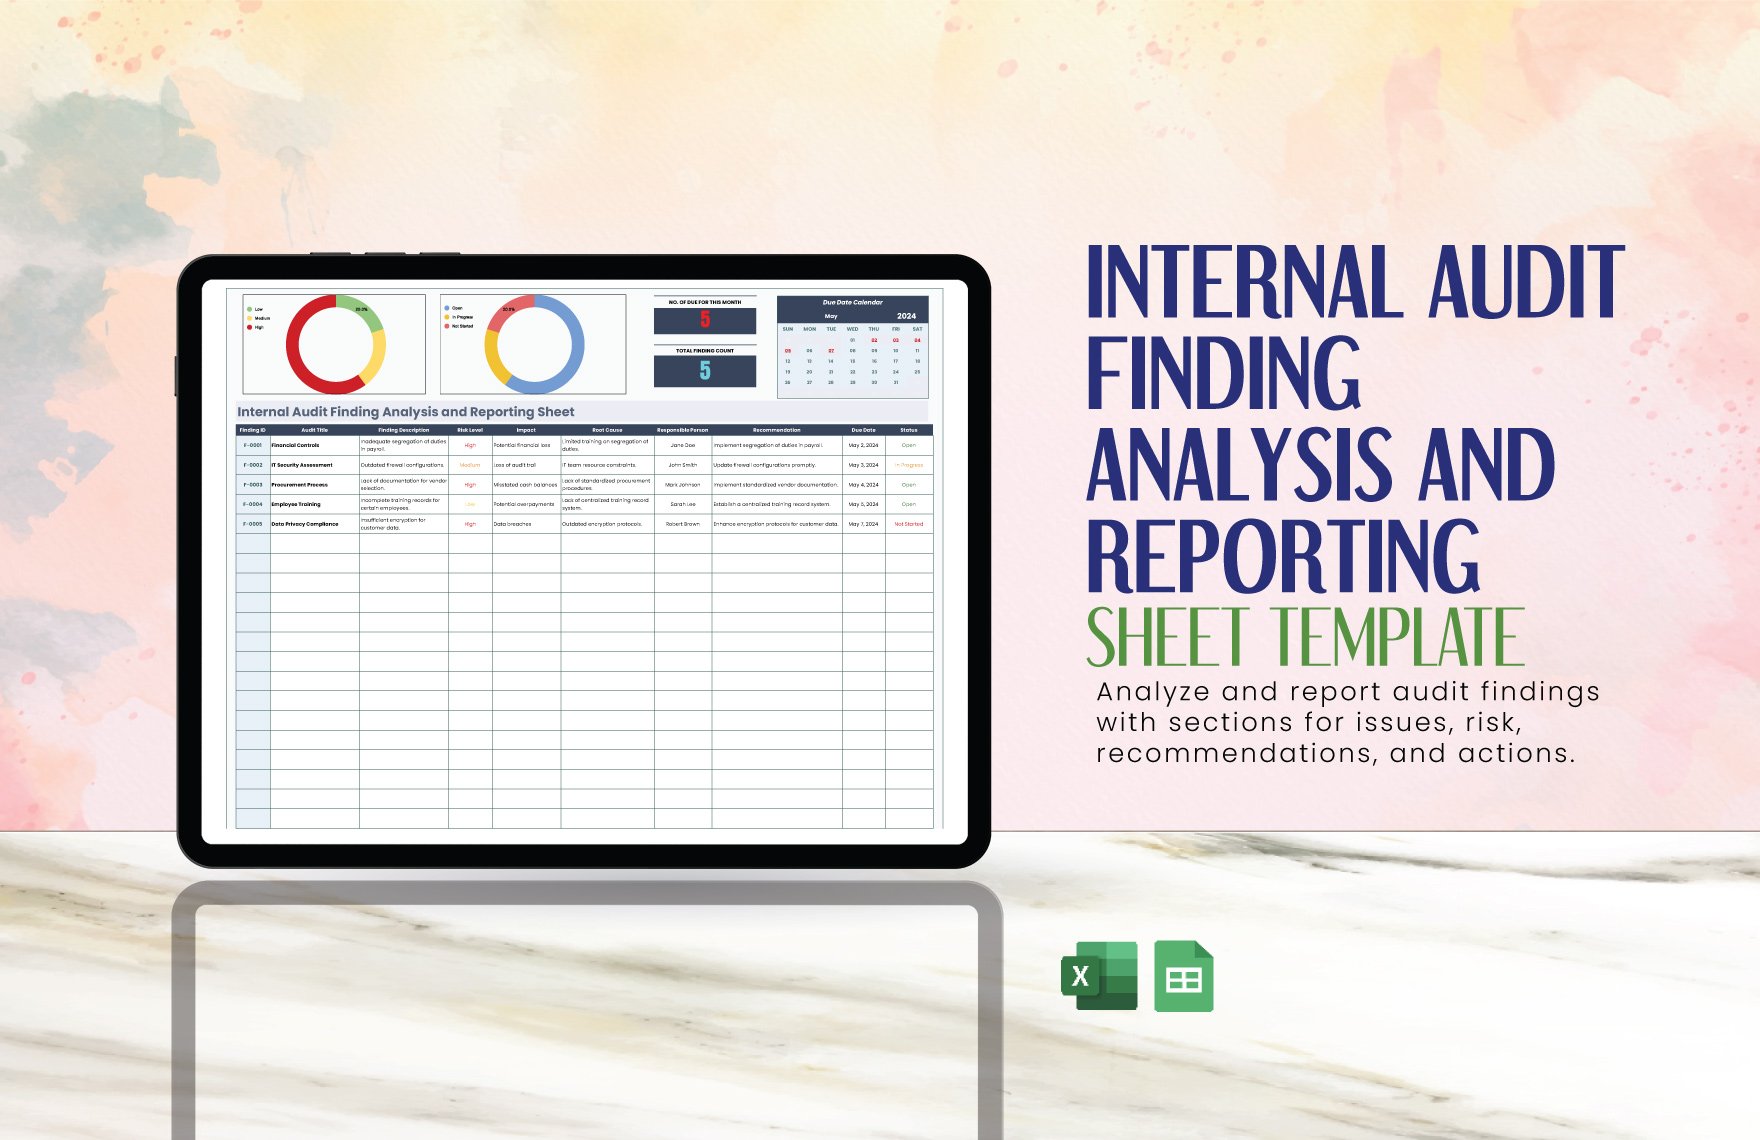 Internal Audit Finding Analysis and Reporting Sheet Template in Excel, Google Sheets